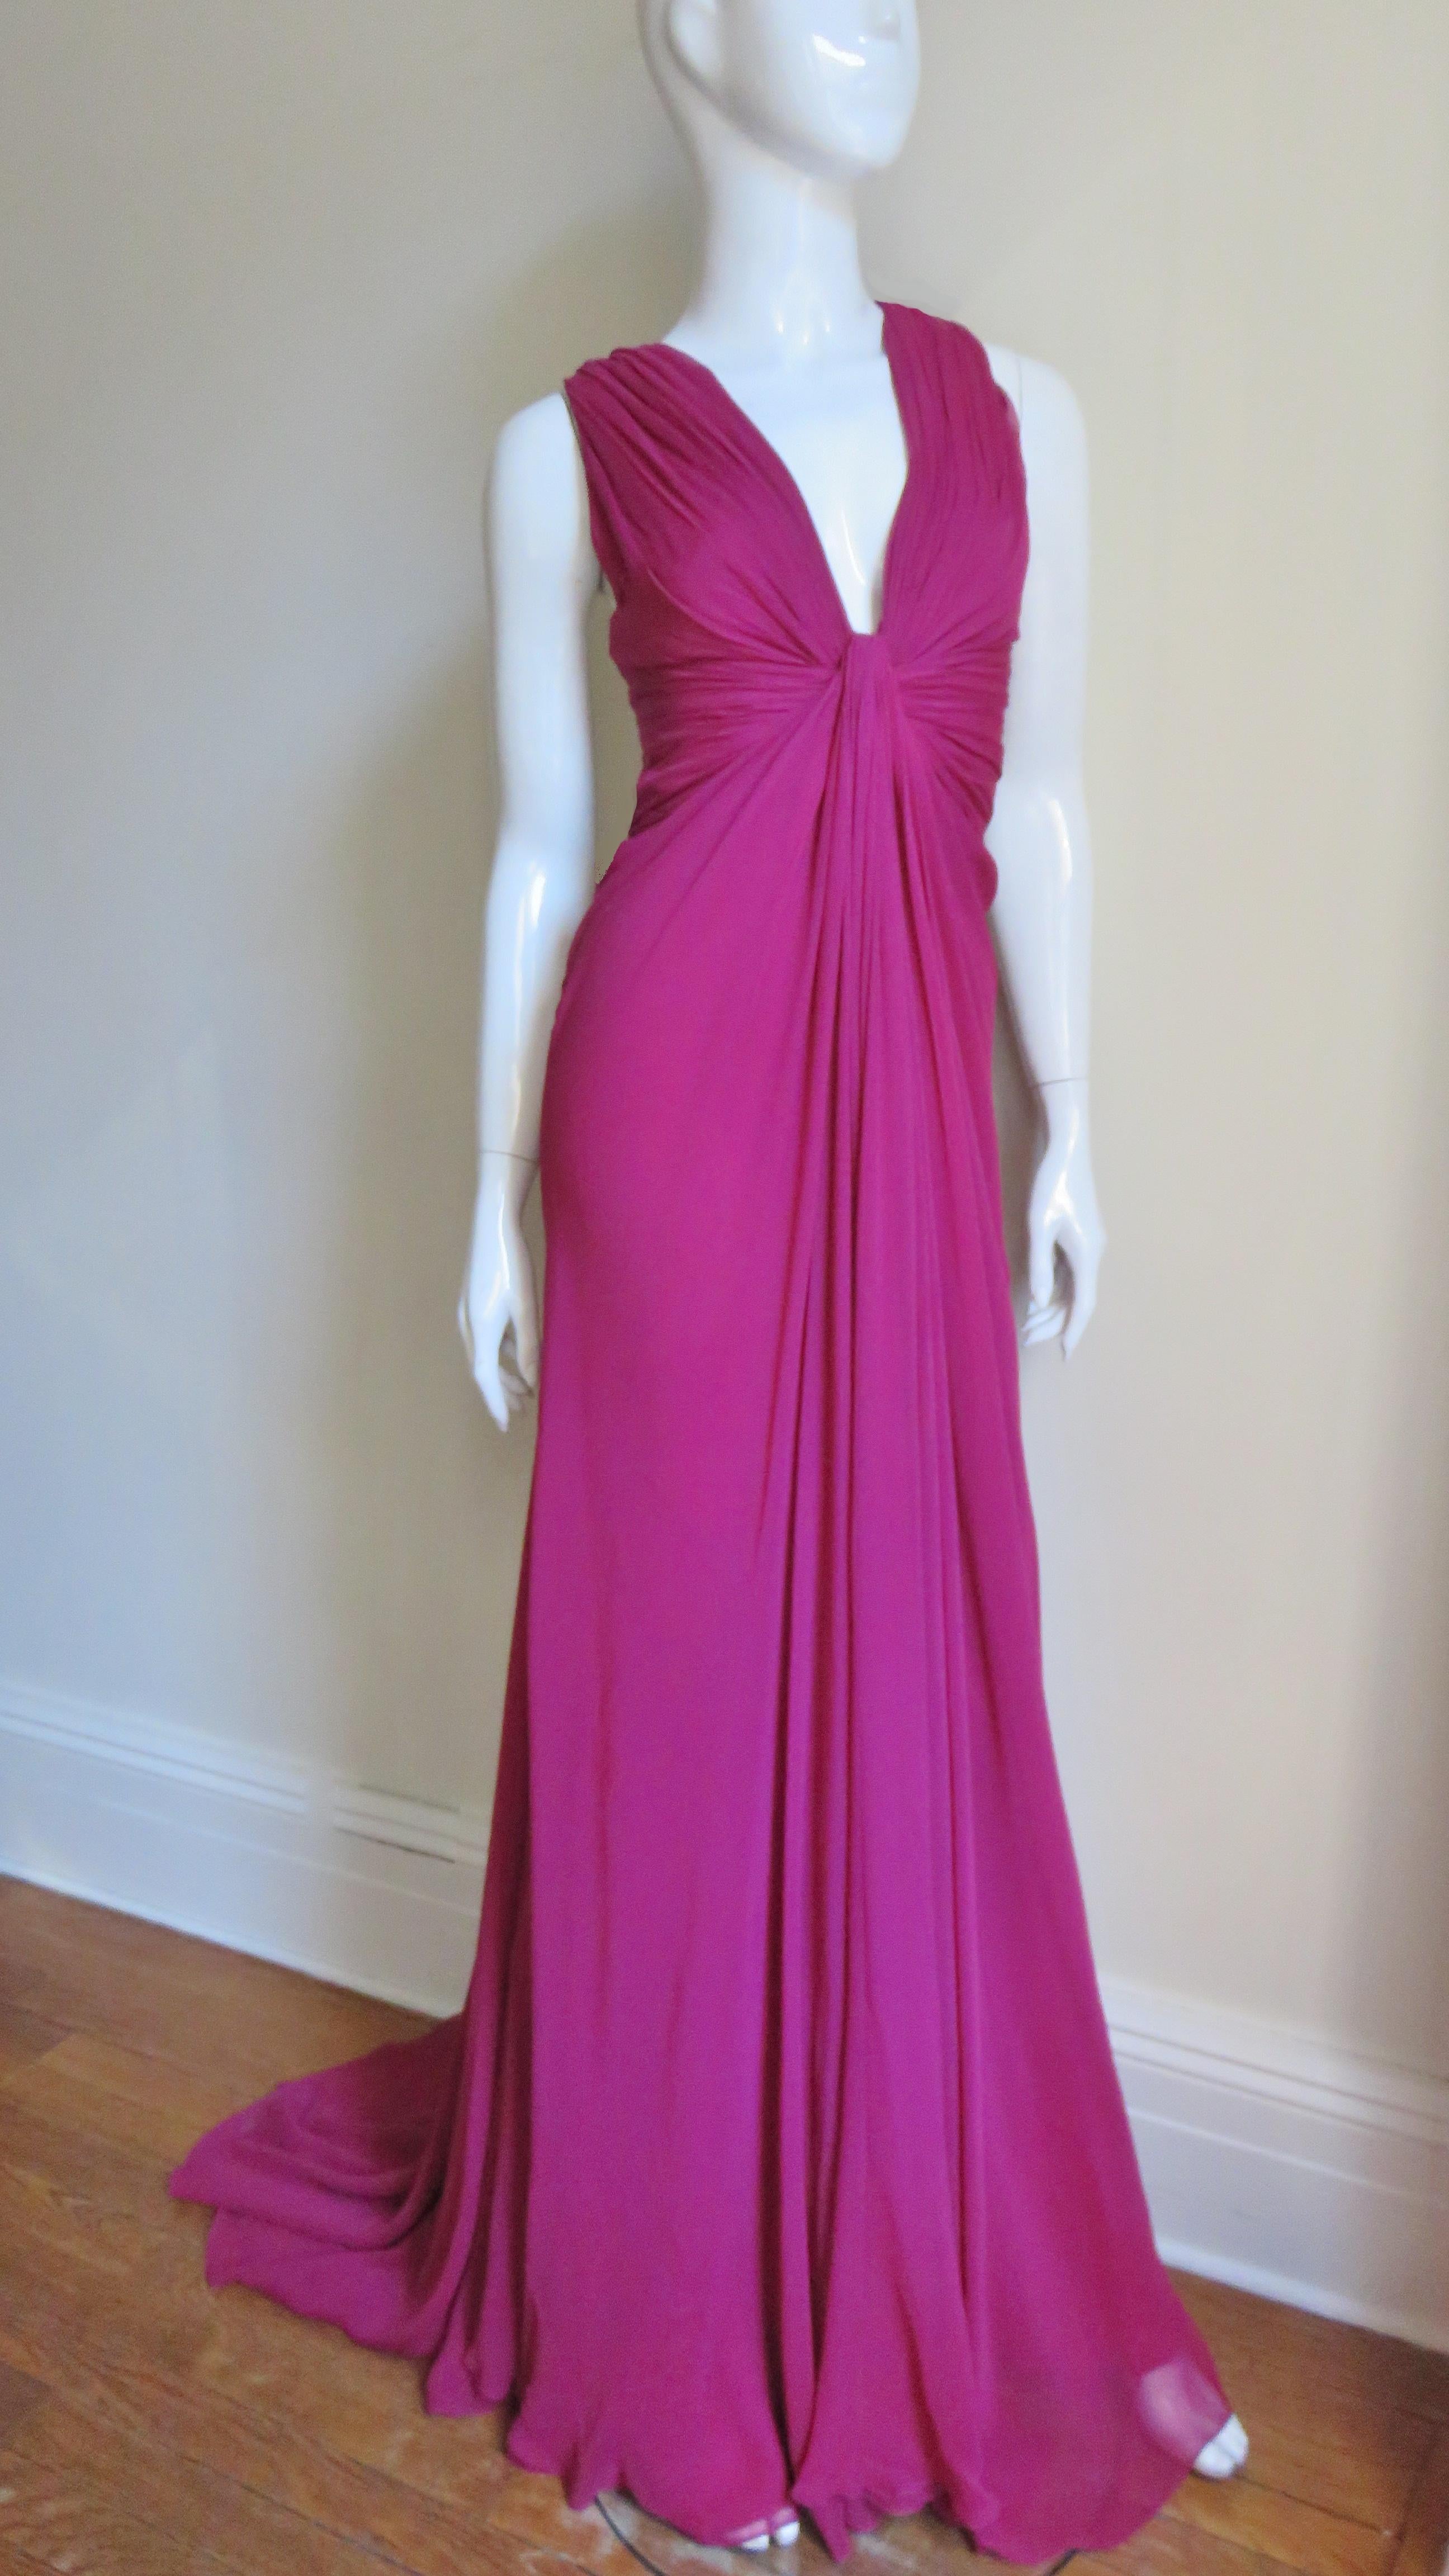 A gorgeous flattering deep pink silk gown from J. Mendel.  It has a ruched plunging neckline and sides all meeting at the center front waist- very flattering. The back is bare to the waist except for straps crossing at the upper back. The skirt has